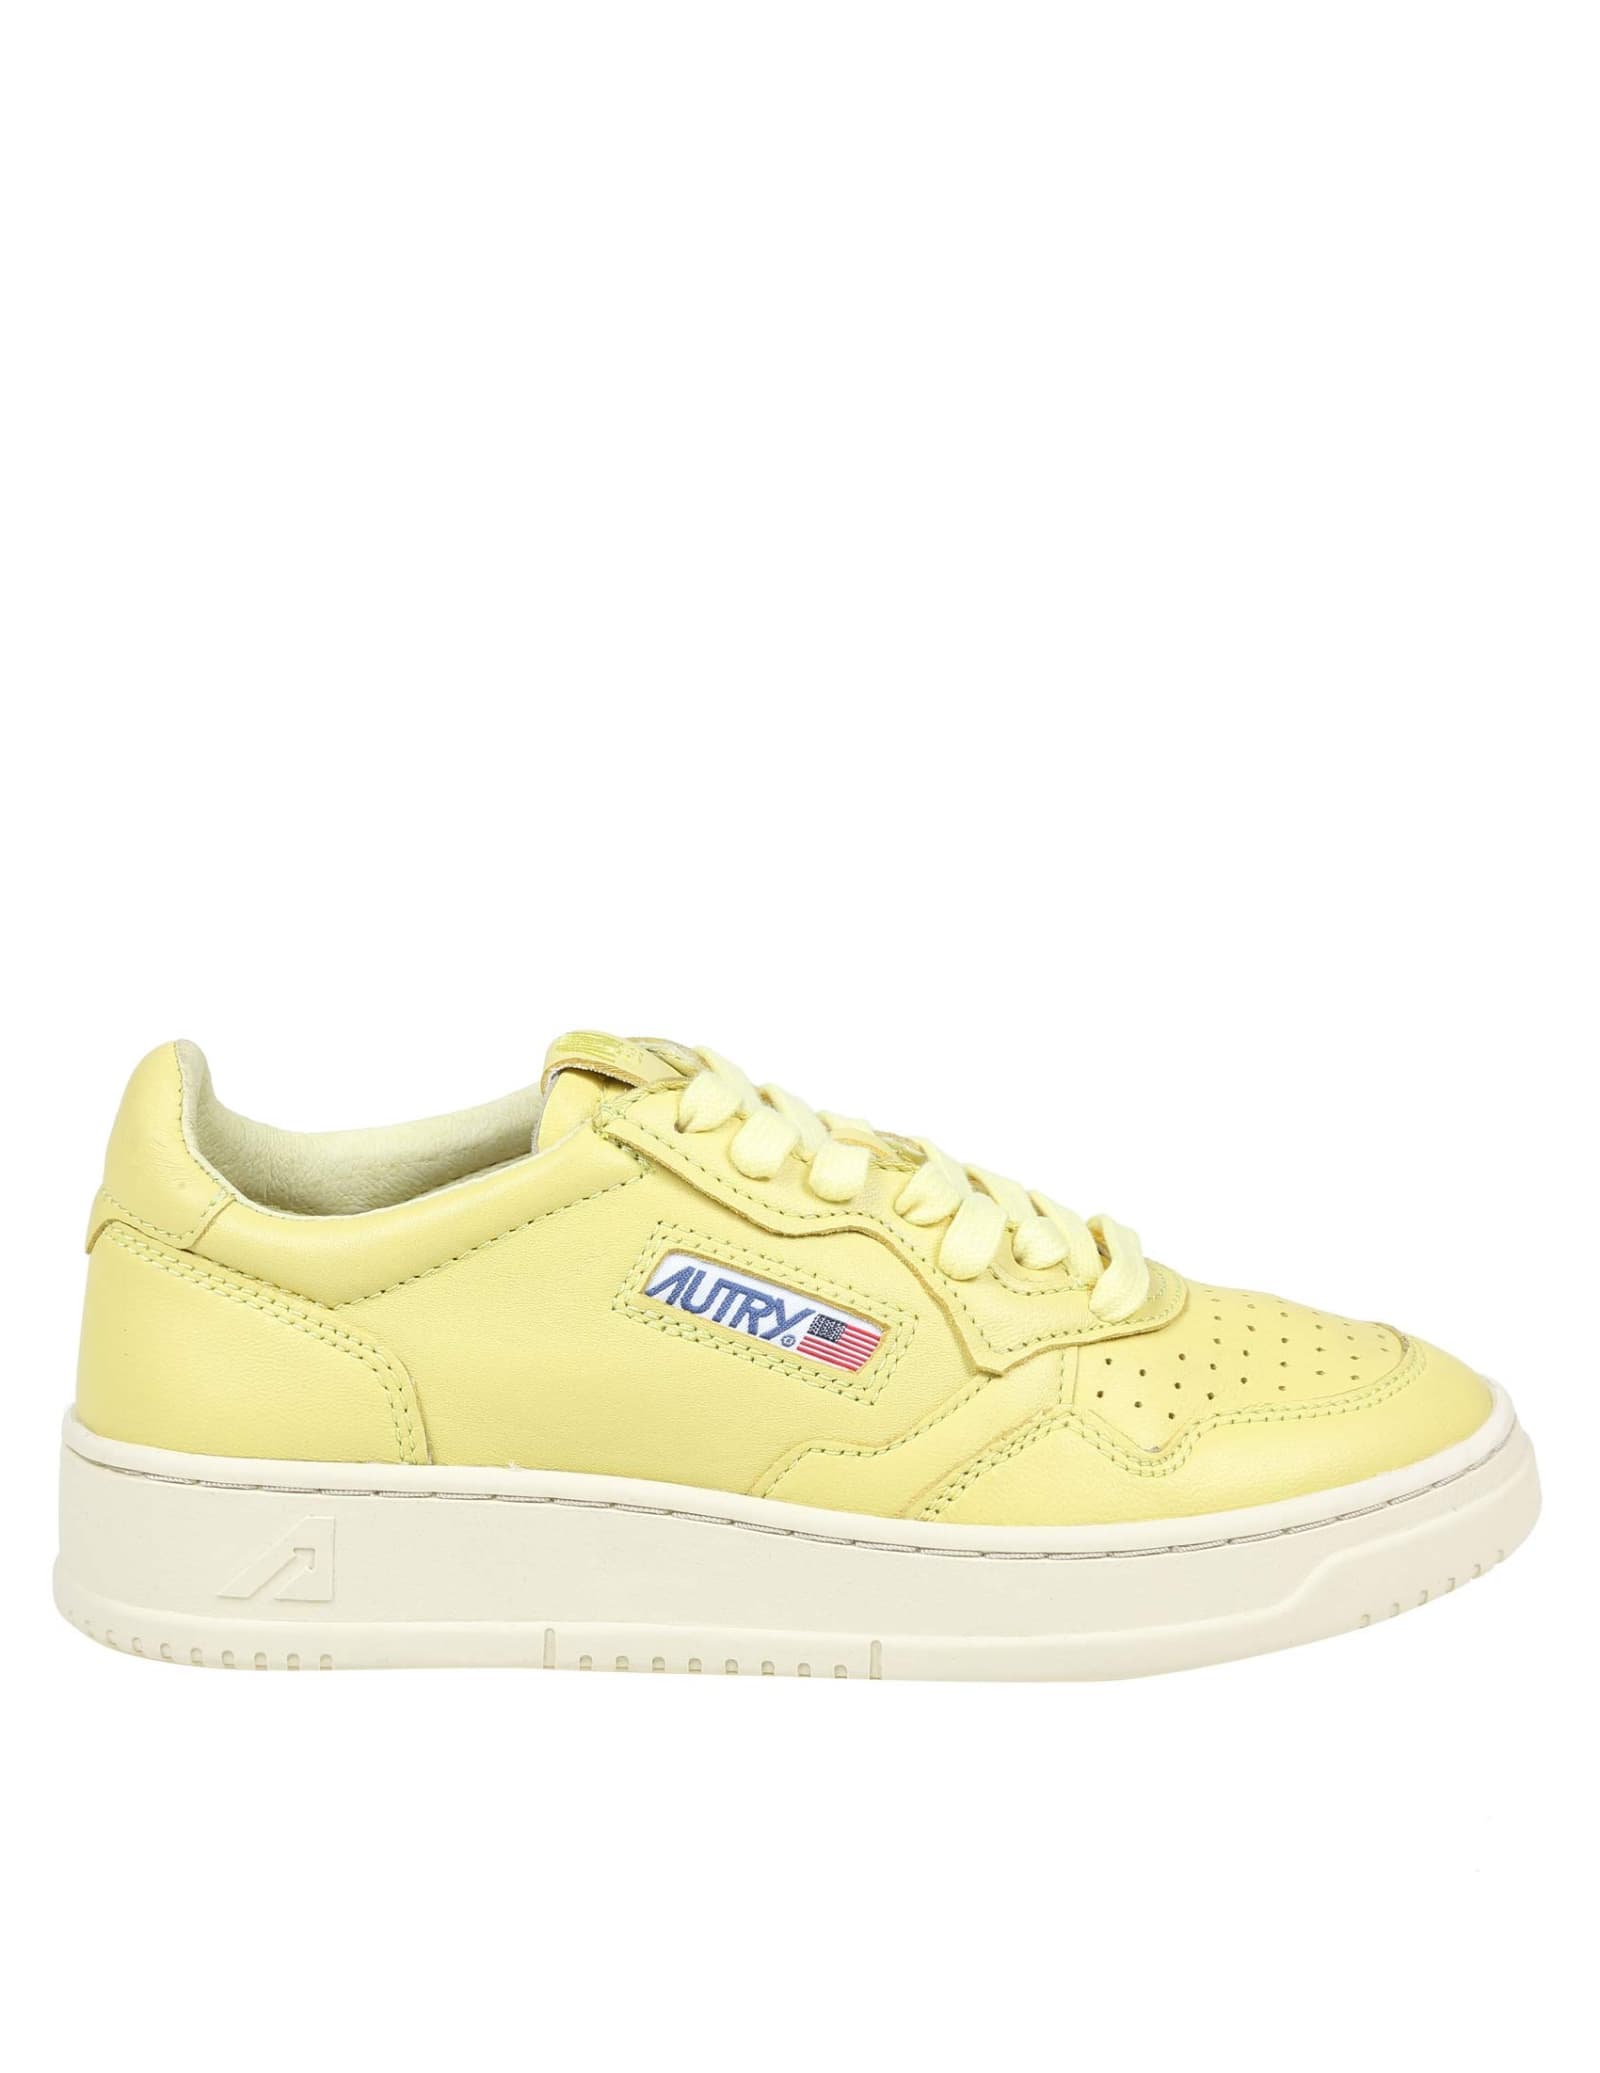 Autry Sneakers In Yellow Leather